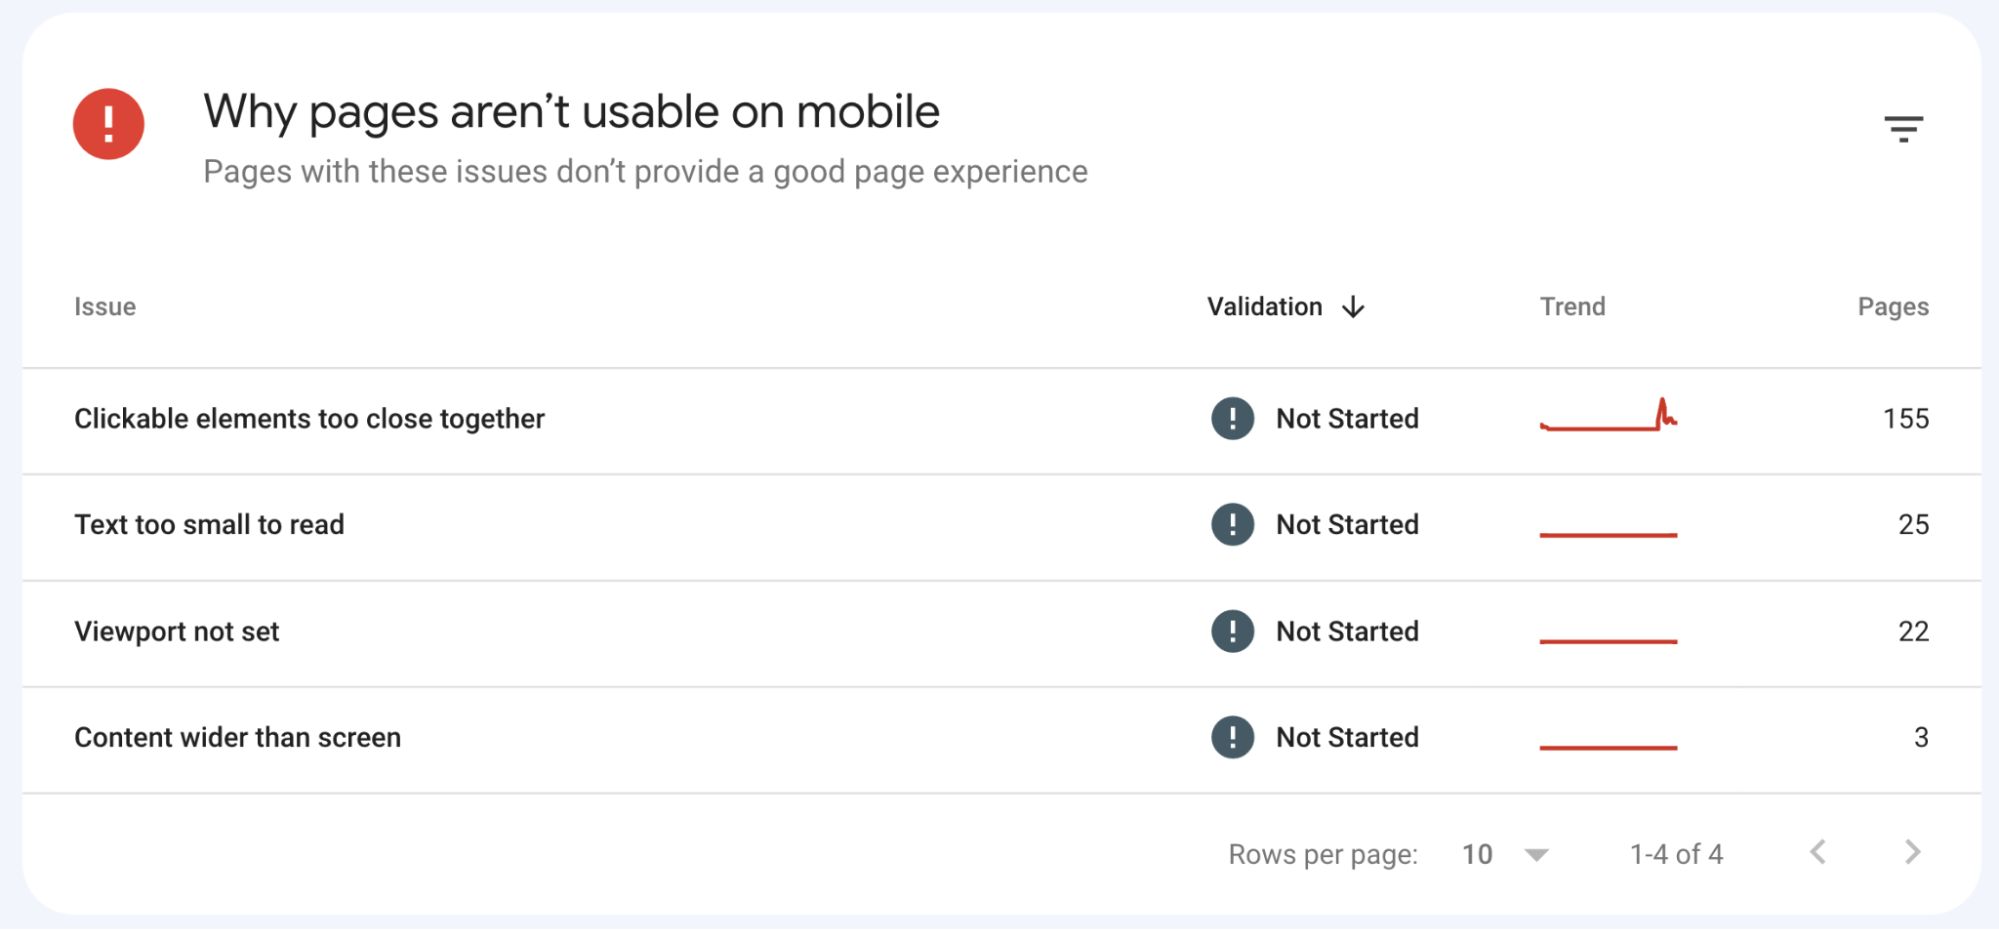 Summary of mobile usability issues
